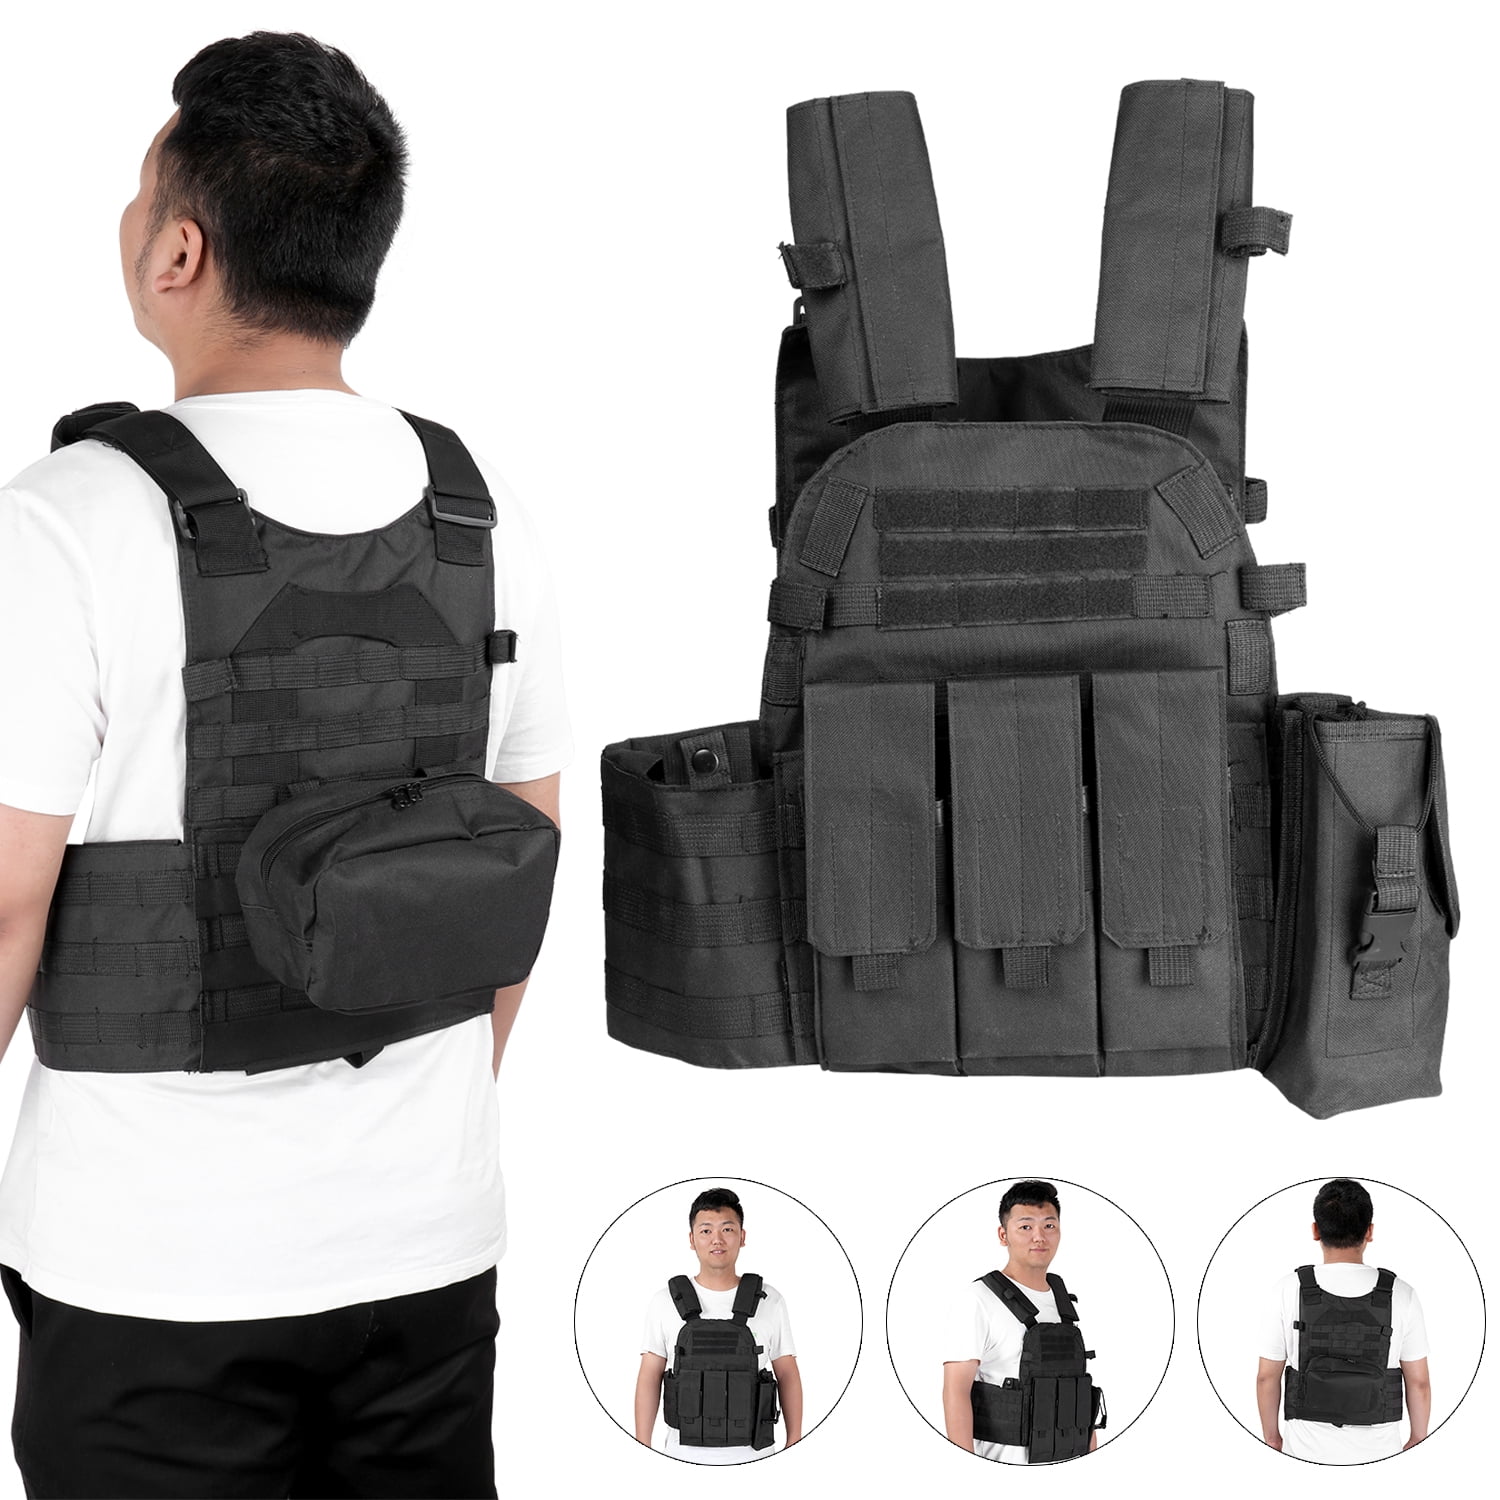 Weight Vest Running Exercise Fitness Tool Boxing Training Equipment Sports Loading Weight 22.0lb 